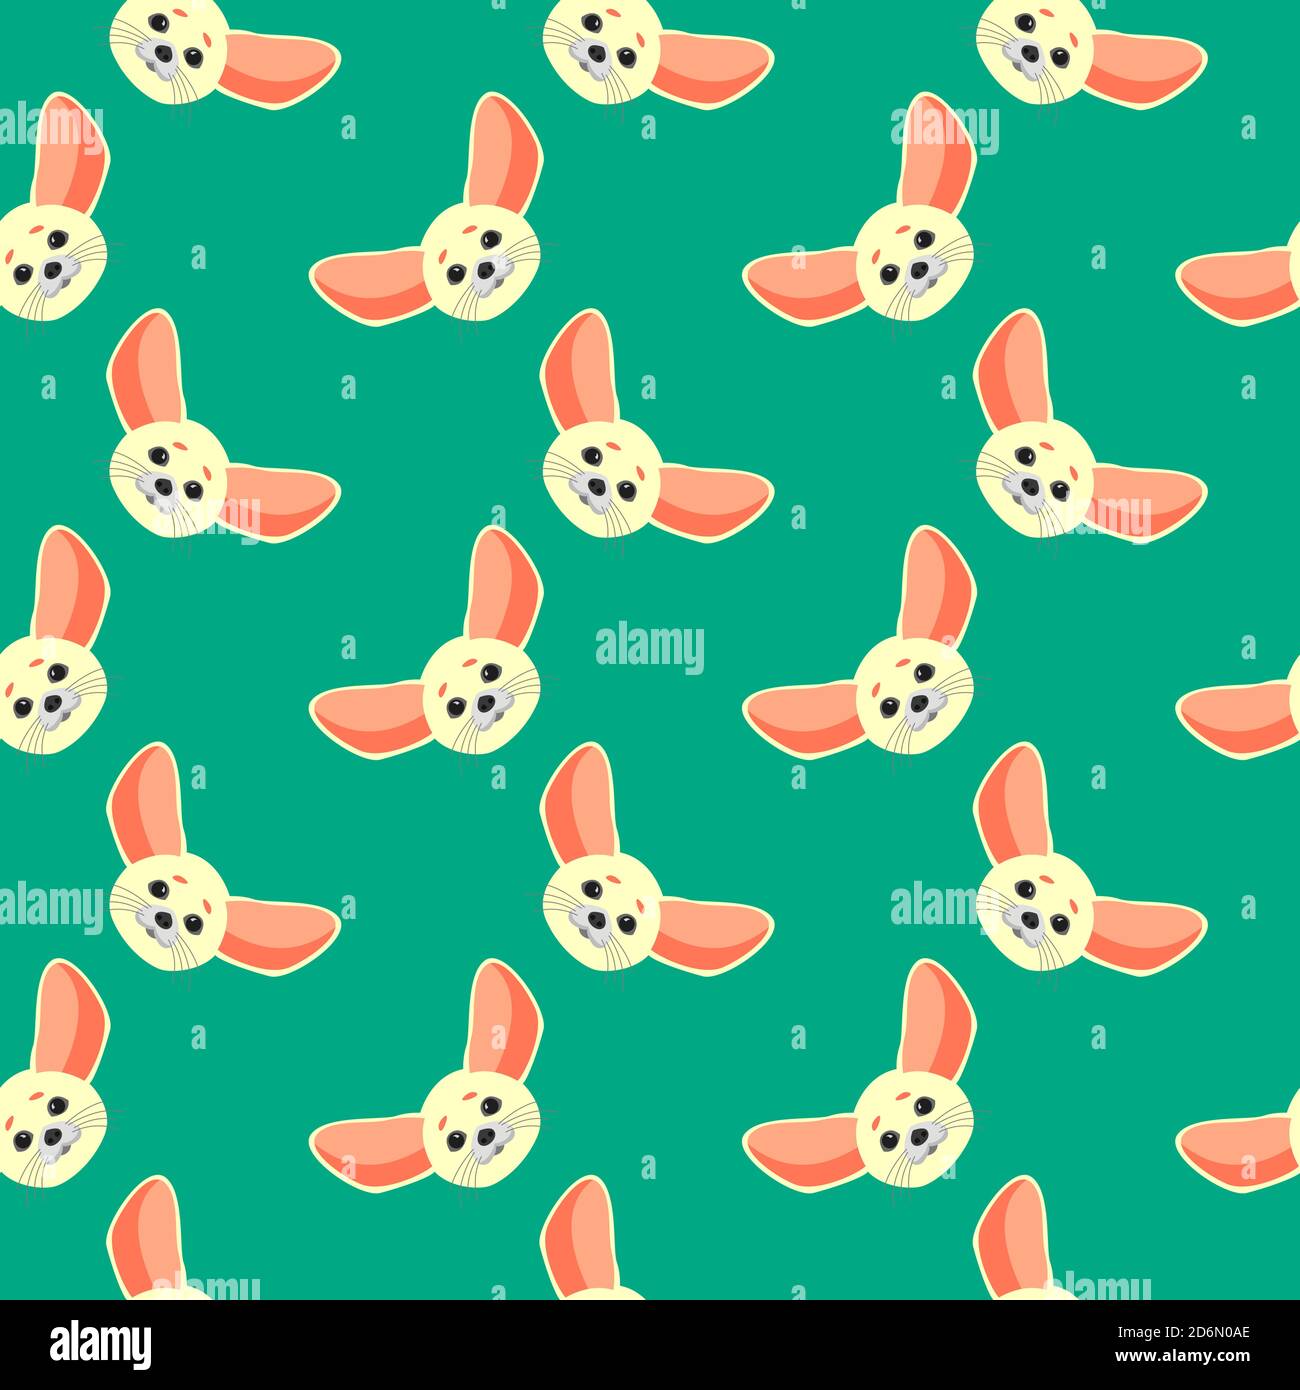 Fennec fox, seamless pattern on green background. Stock Vector